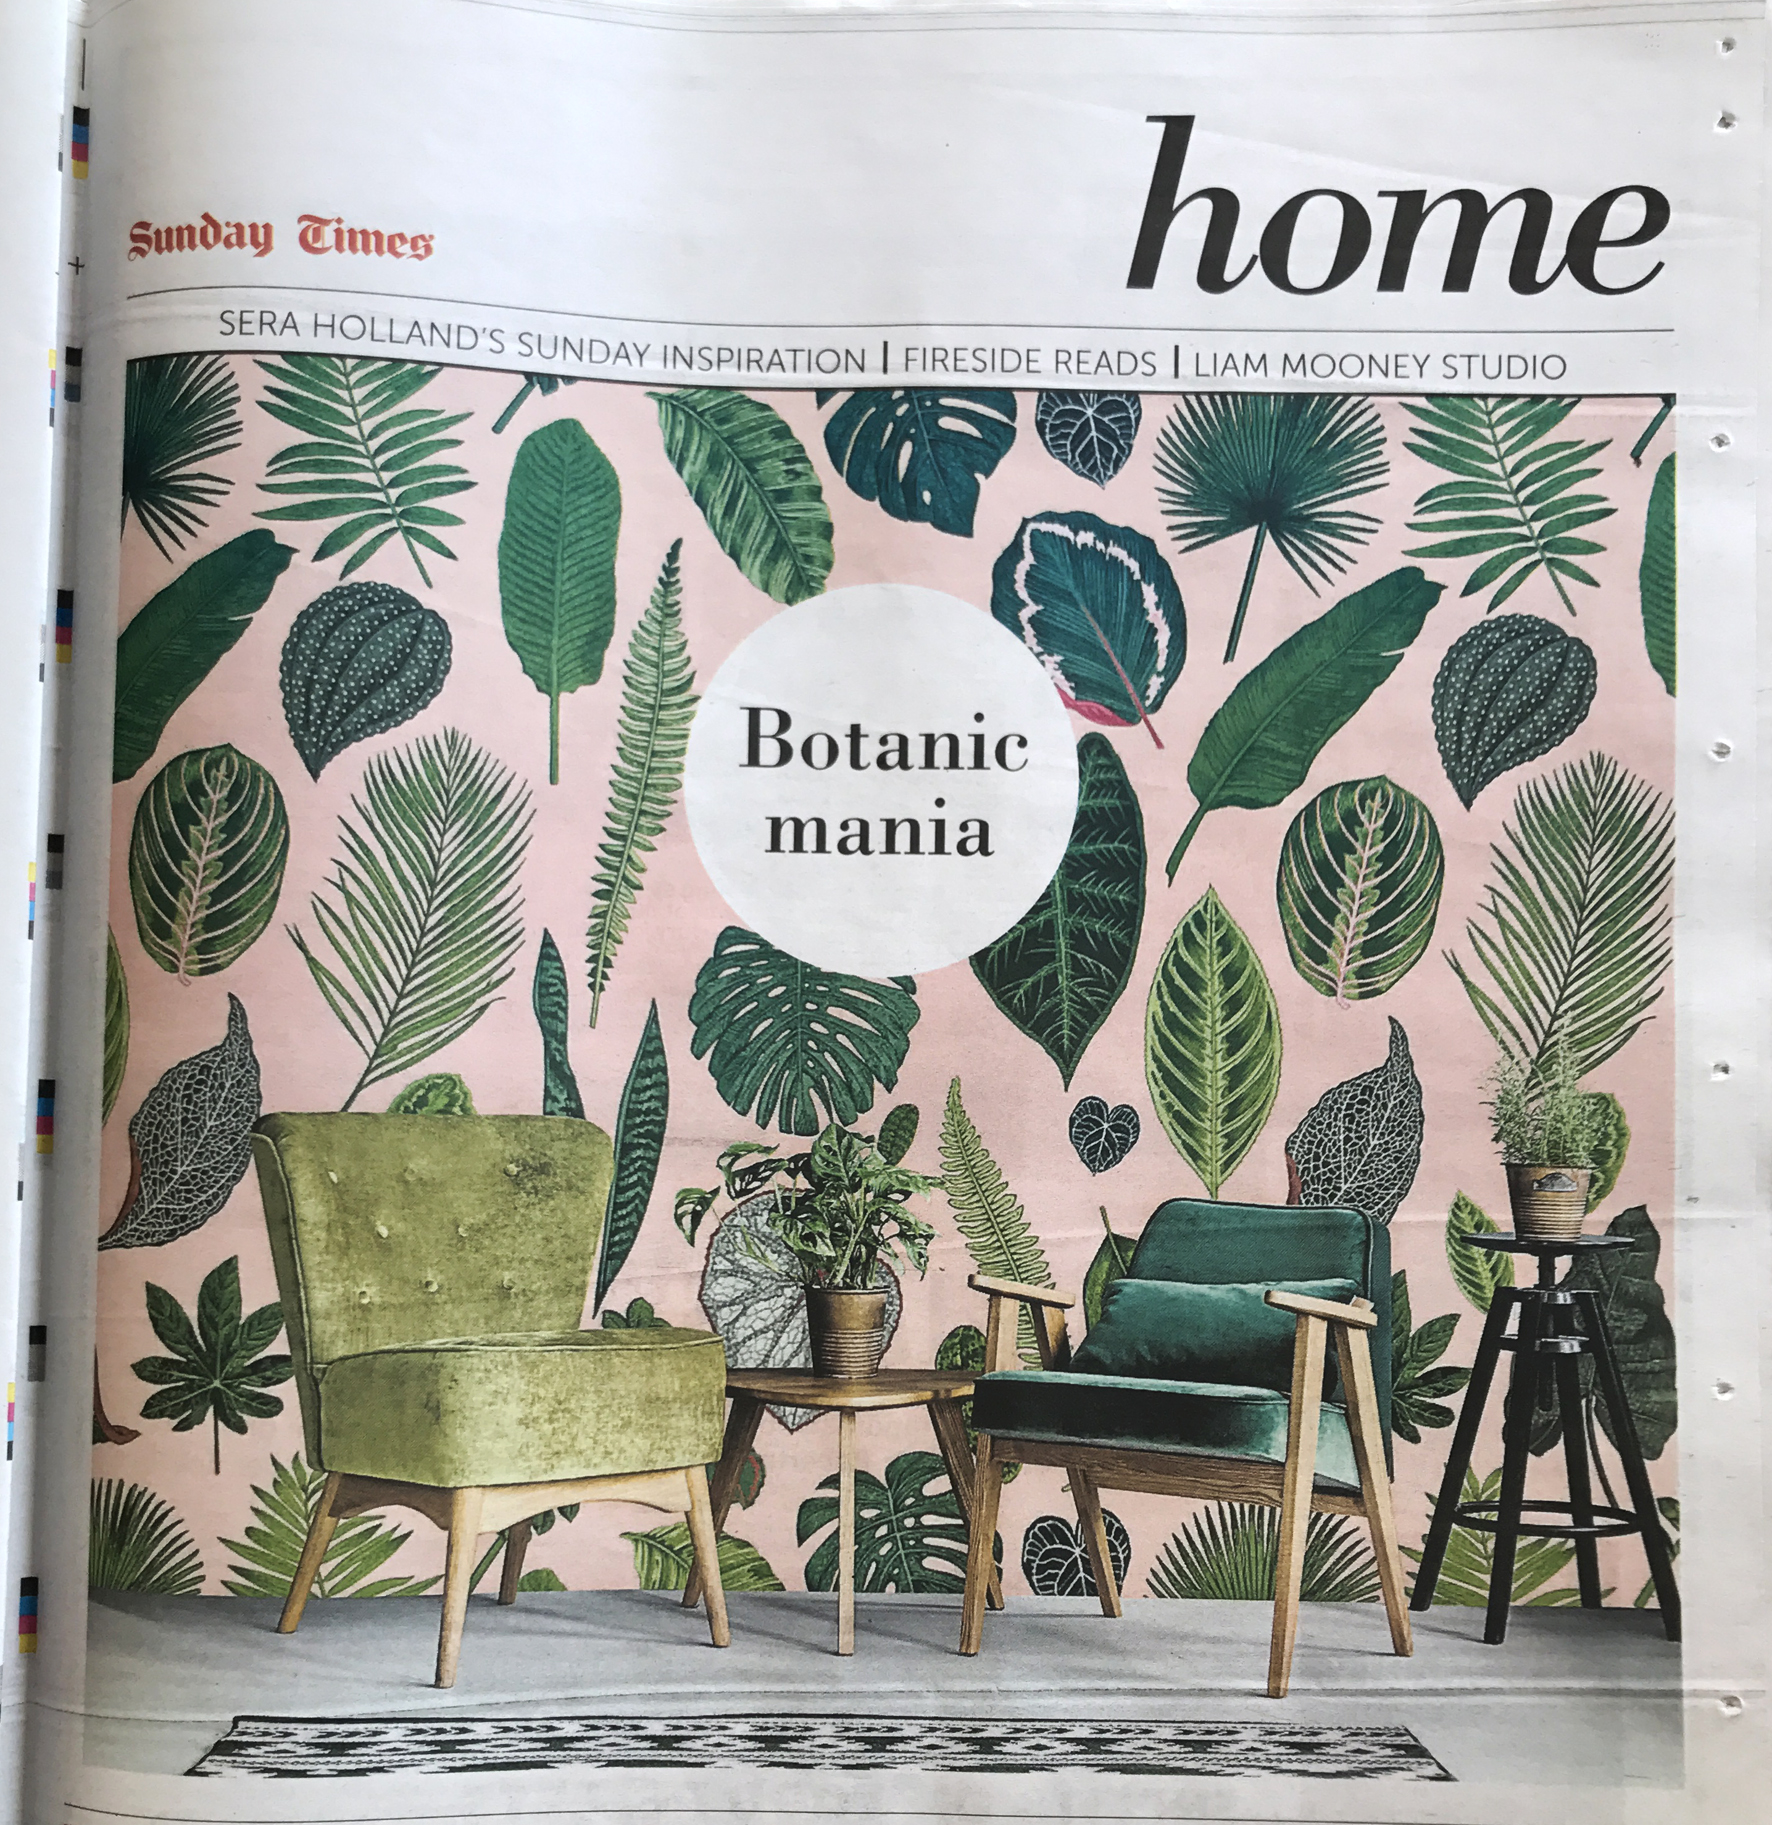 Sunday Times Home June 2017 1